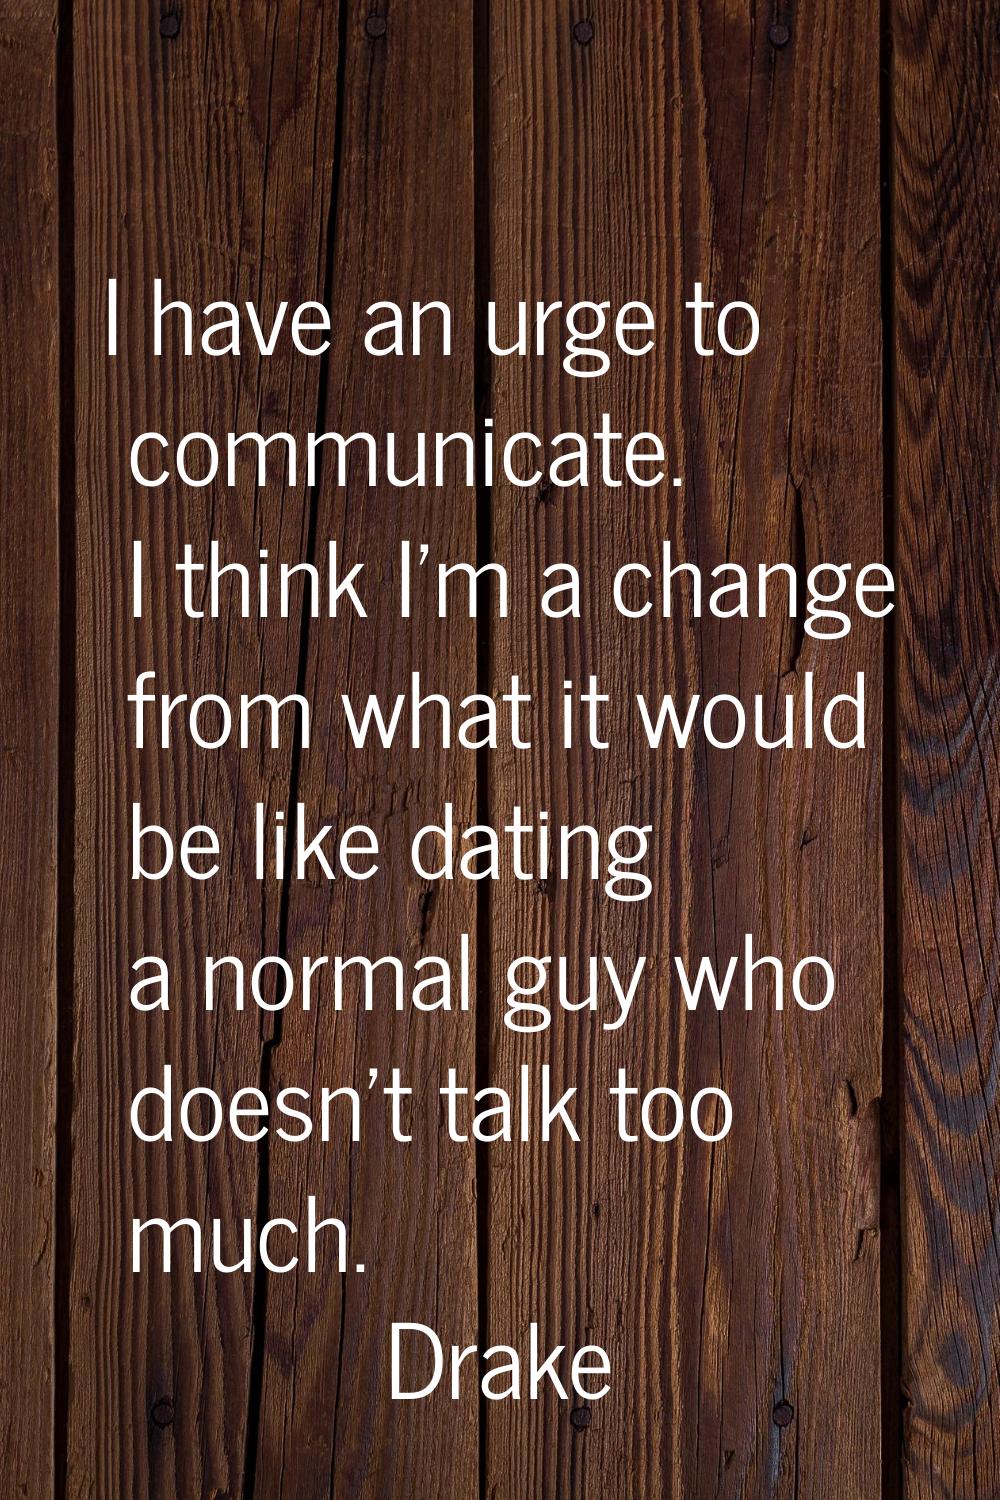 I have an urge to communicate. I think I'm a change from what it would be like dating a normal guy 